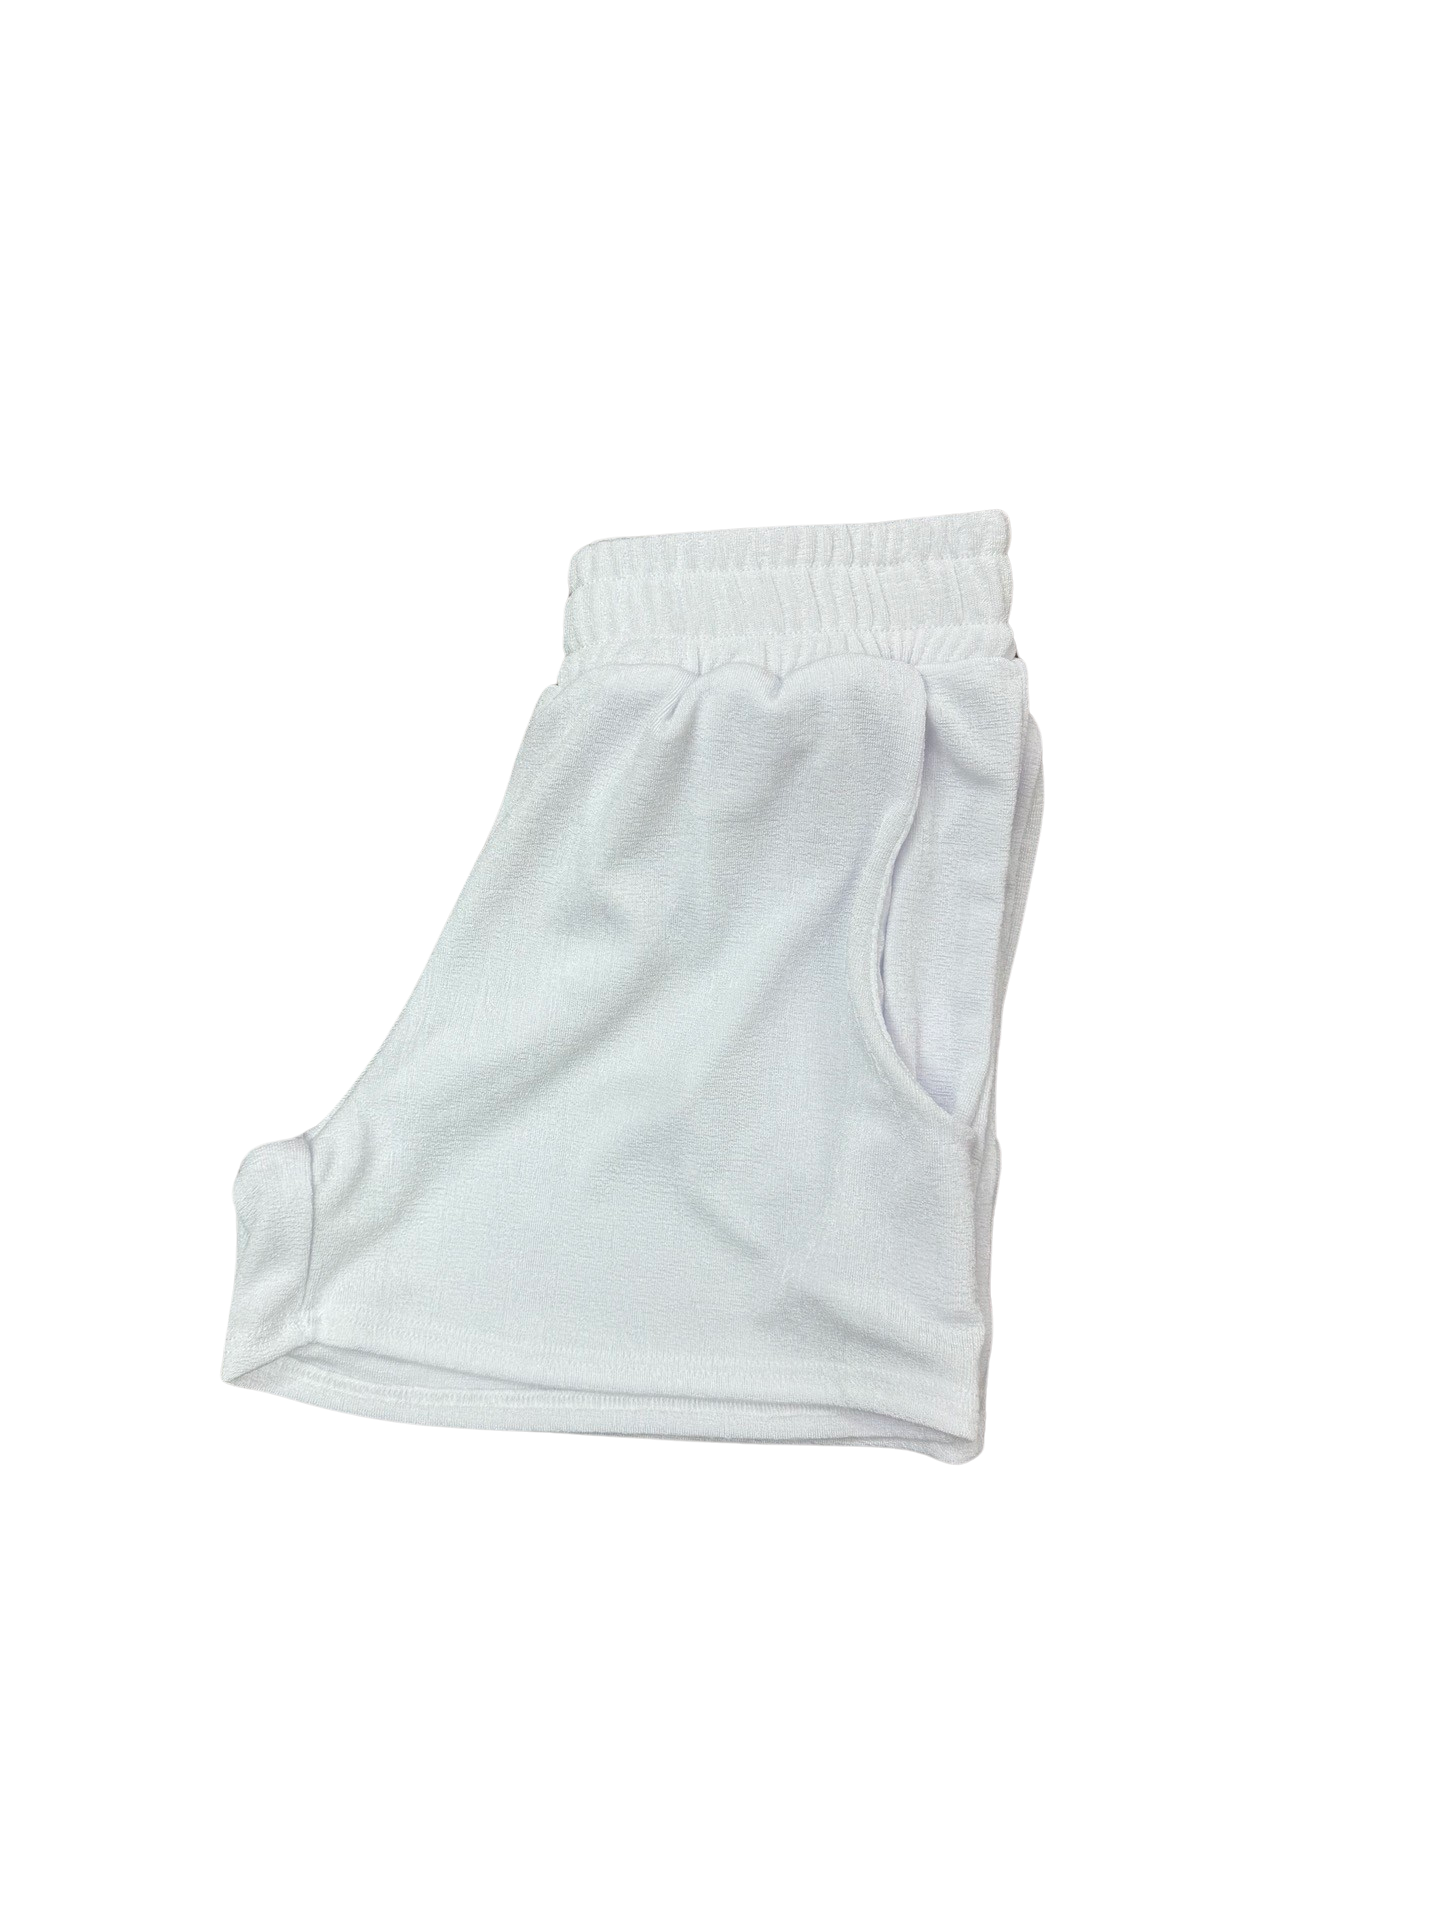 Girls- Erge Solid Slinky Layer Bottom Tank and Short Set